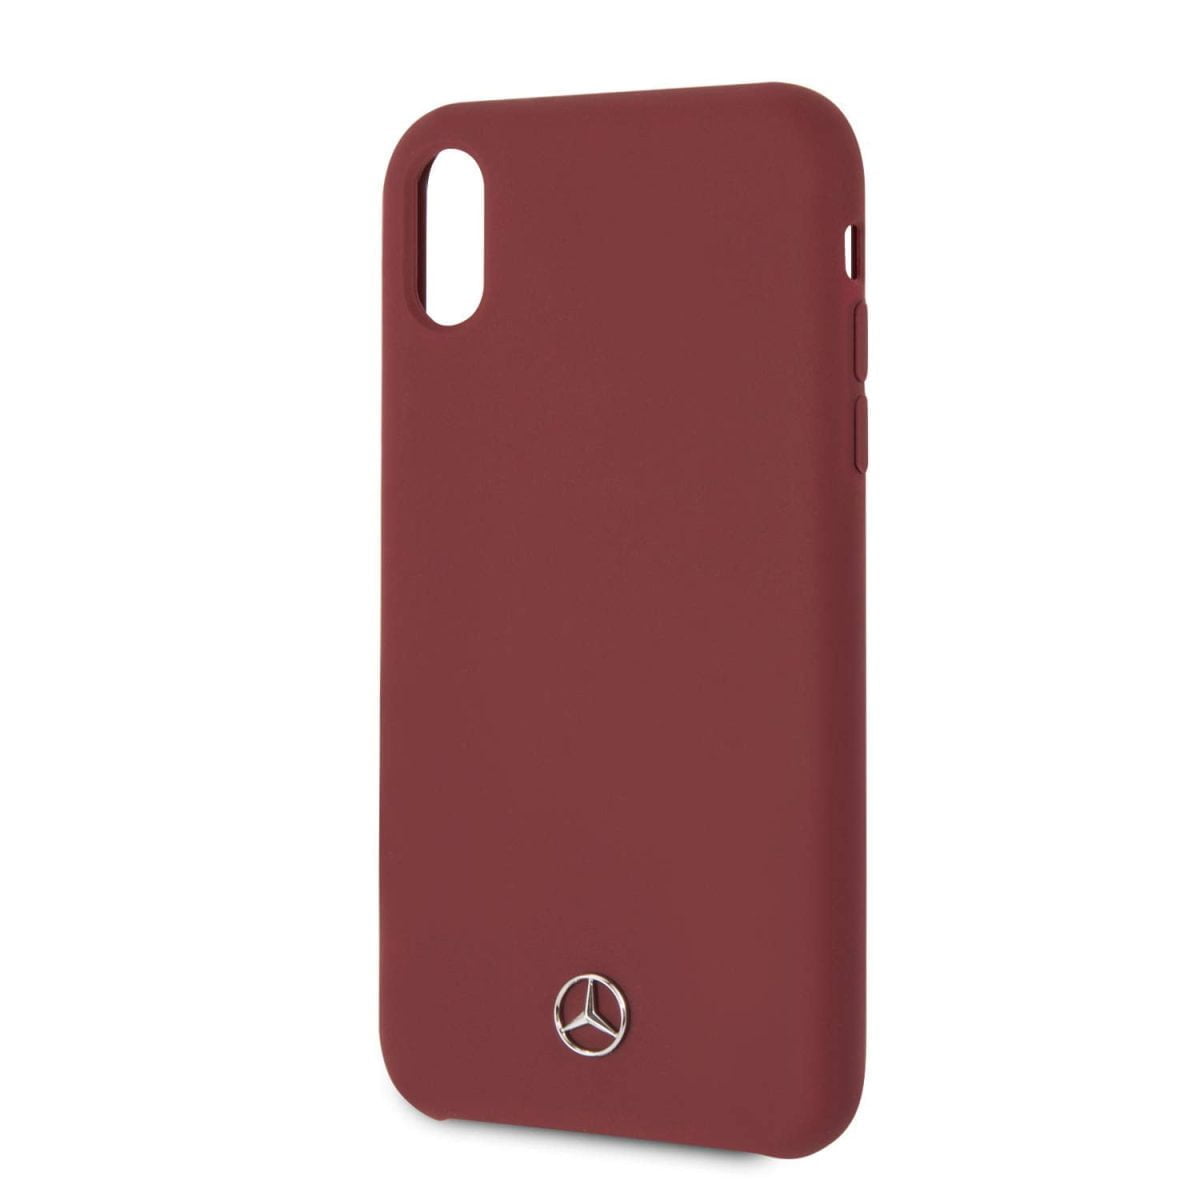 Mercedes Benz Iphone Xr Liquid Silicone Case With Microfiber Lining Red Drop Protection Easily Accessible Ports Officially Licensed 03 &Lt;H1&Gt;Iphone Xs Max Liquid Silicone Case With Microfiber Lining Red (Mercedes-Benz)&Lt;/H1&Gt; &Lt;Span Class=&Quot;Y2Iqfc&Quot; Lang=&Quot;En&Quot;&Gt;Mercedes-Benz Pattern Ii Series. The Minimalist And Captivating Aesthetics Of Mercedes-Benz Interior Design Have Been Transferred Silicon. They Guarantee A Unique Look And Safety For Your Phone. - Leather Case With A Metallic Mercedes-Benz Logo Has A 3D Effect - The Unique Finish Enhances The Look And Quality Of This Case - Designed With Easy Access To Ports And Buttons - Case Compatible With Wireless Chargers Collection: Pattern Line Twister Type: Hardcase Material:silicon Red  Compatibility: Iphone X / Xs Product Manufactured Under License From Mercedes-Benz.&Lt;/Span&Gt; Iphone Cases Iphone Xs Max Liquid Silicone Case With Microfiber Lining Red (Mercedes-Benz)